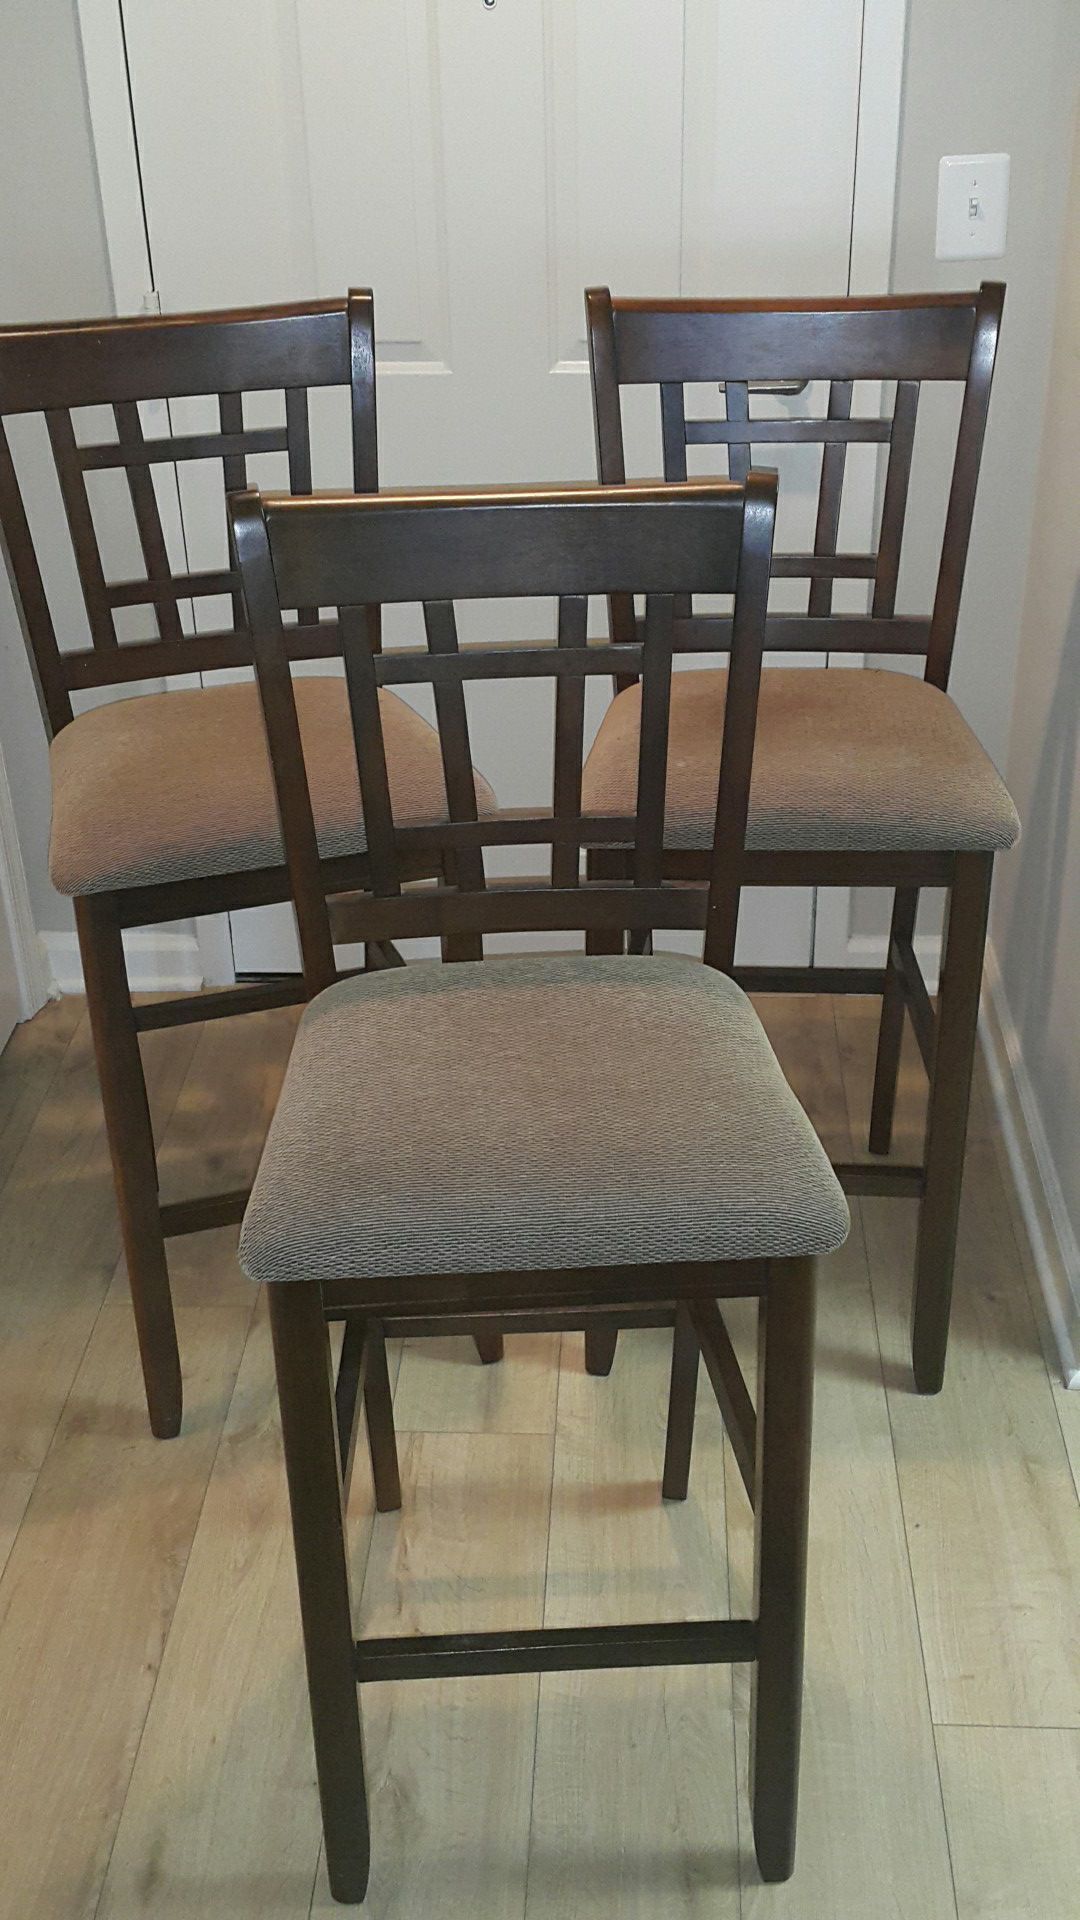 Wooden stool chair with cushion seat (3)